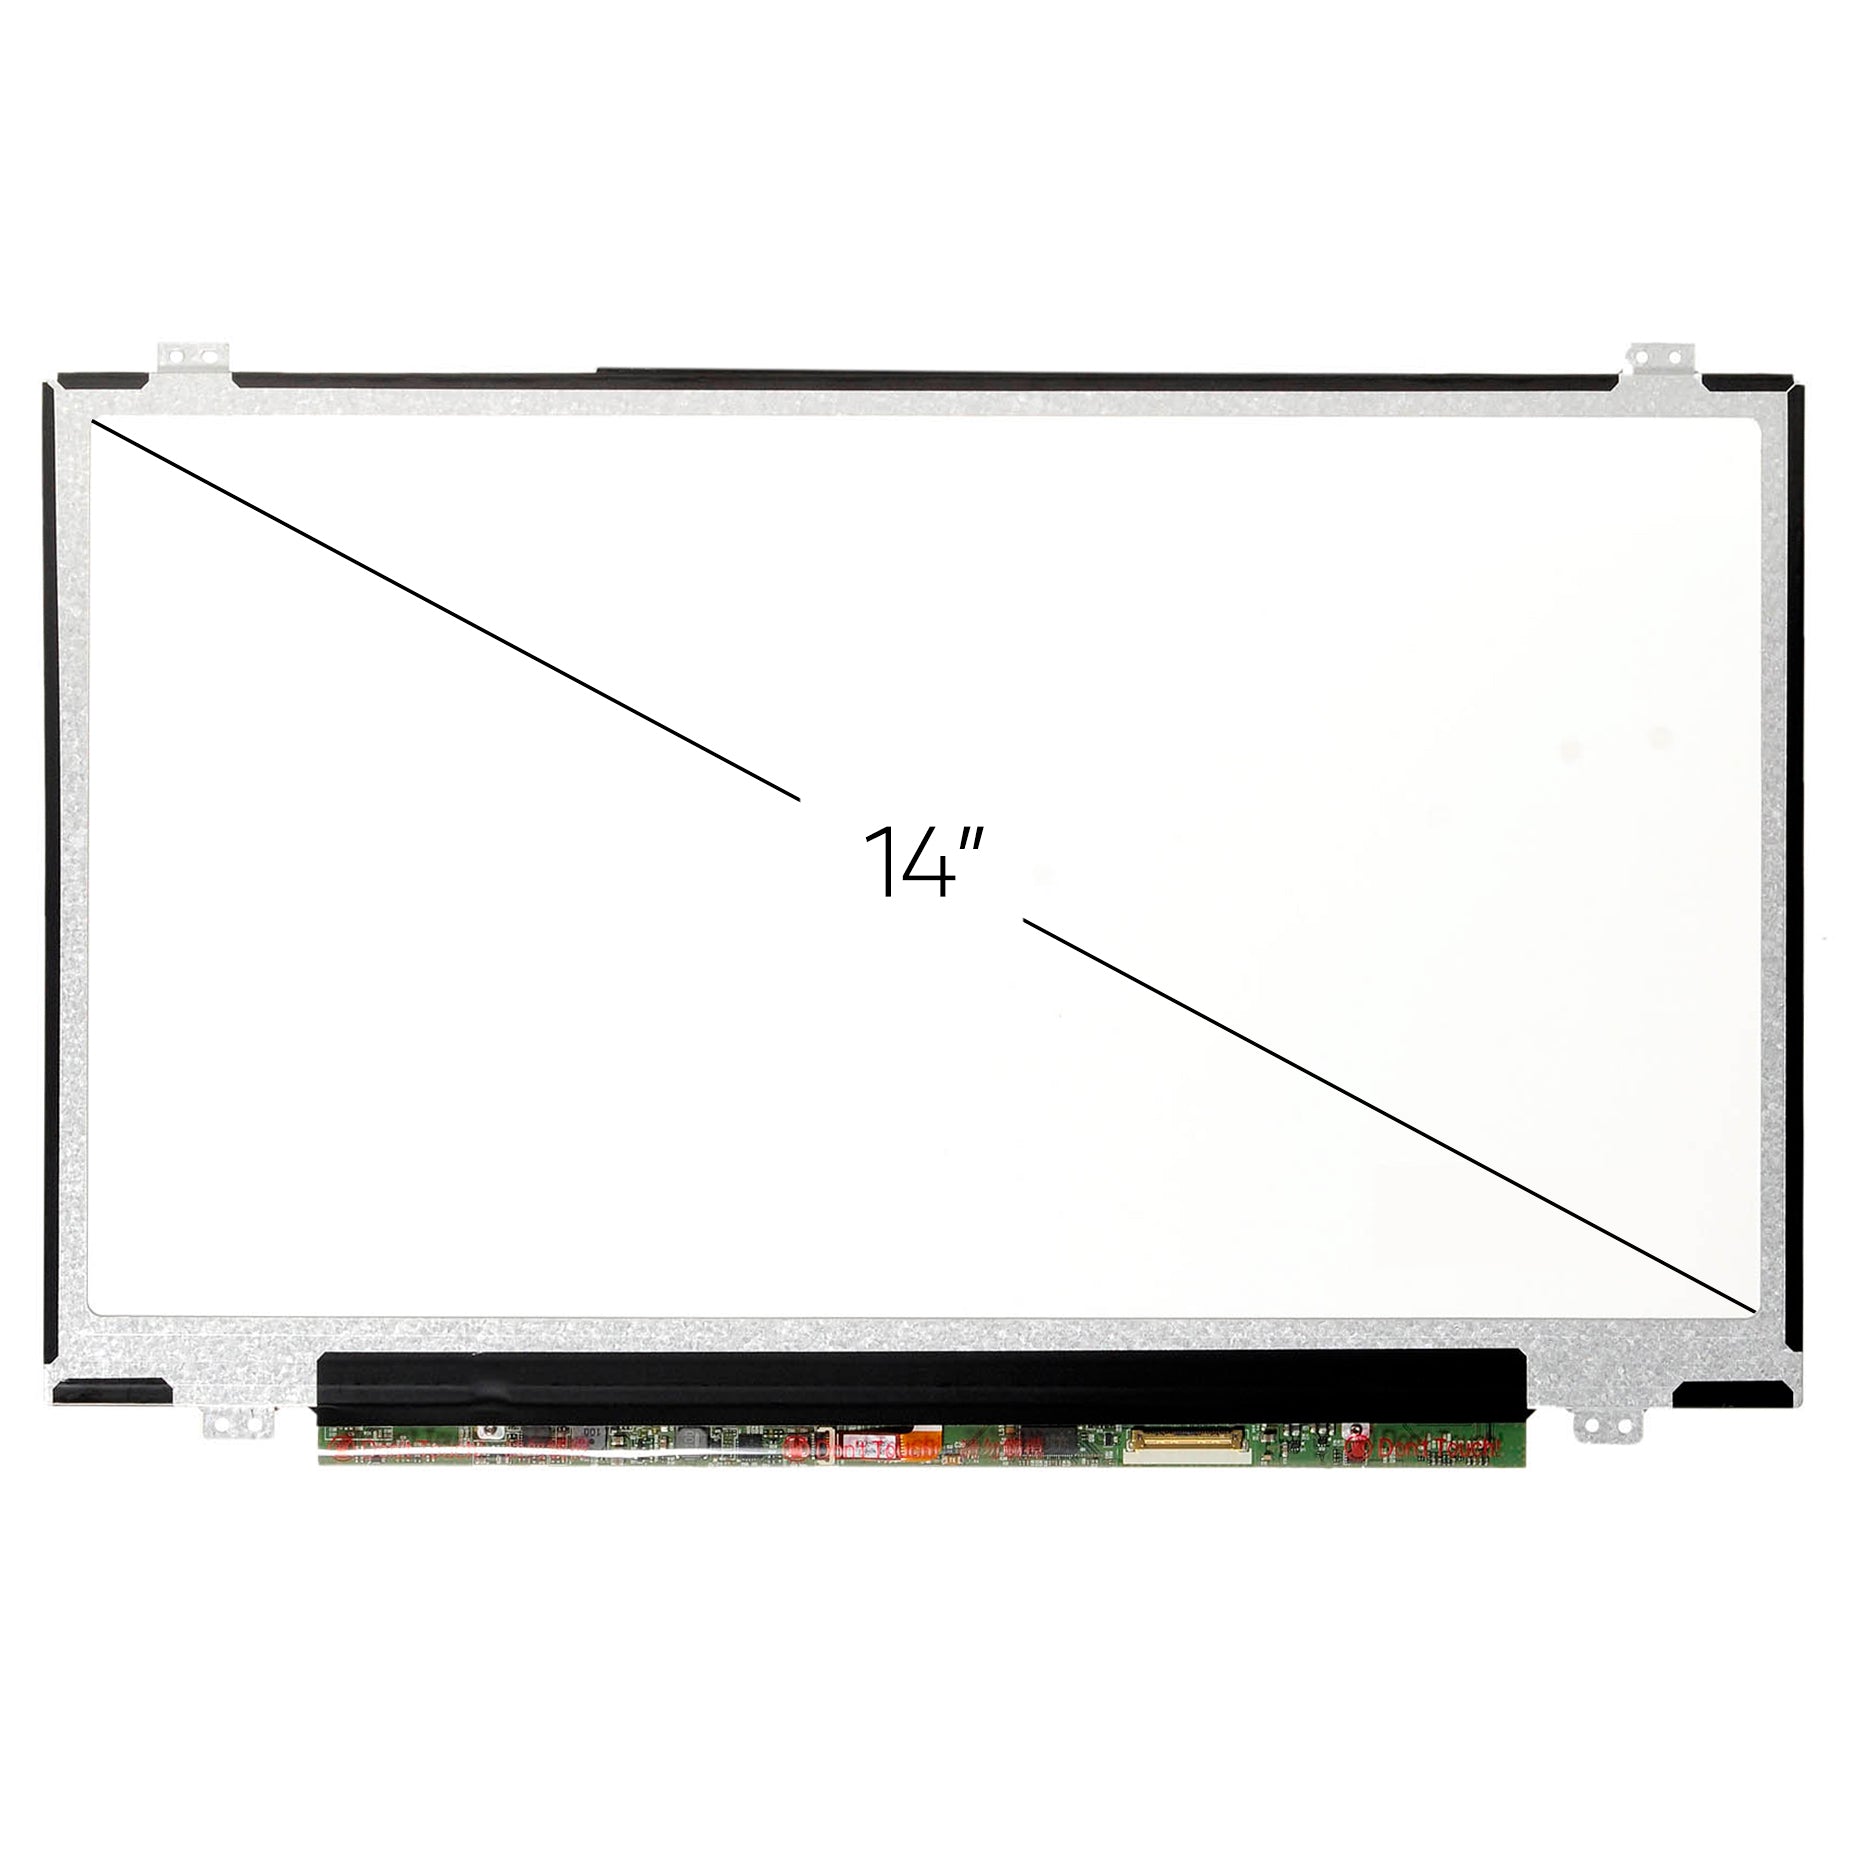 Screen Replacement for Lenovo Thinkpad E470 FHD 1920x1080 IPS Matte LCD LED Display